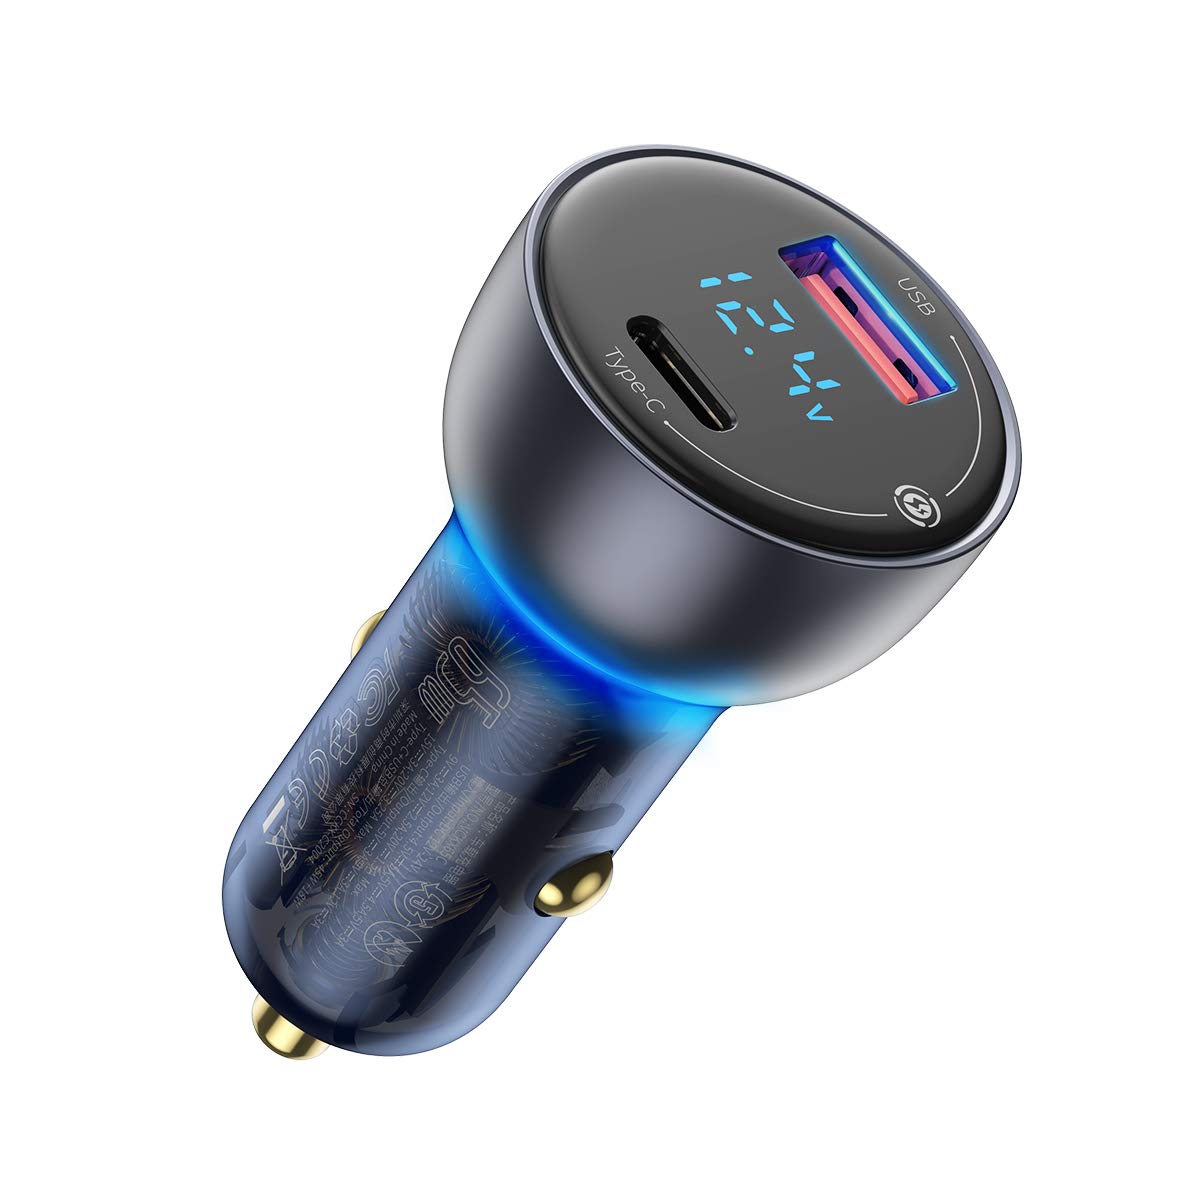 Baseus 65W Car Charger Dual Super Fast Charging Port with LED